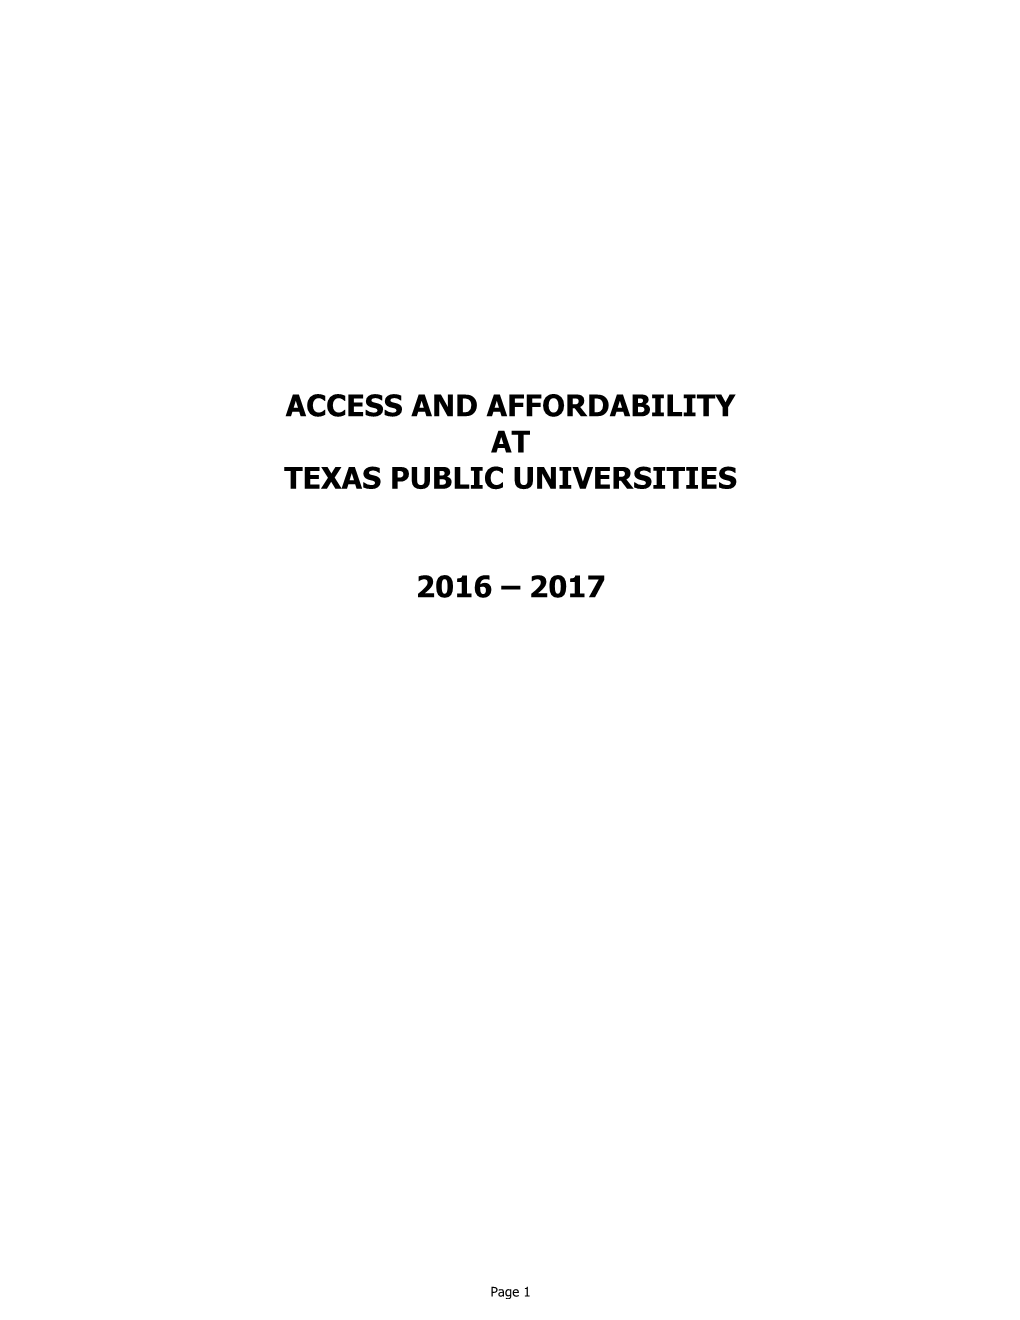 Access and Affordability at Texas Public Universities